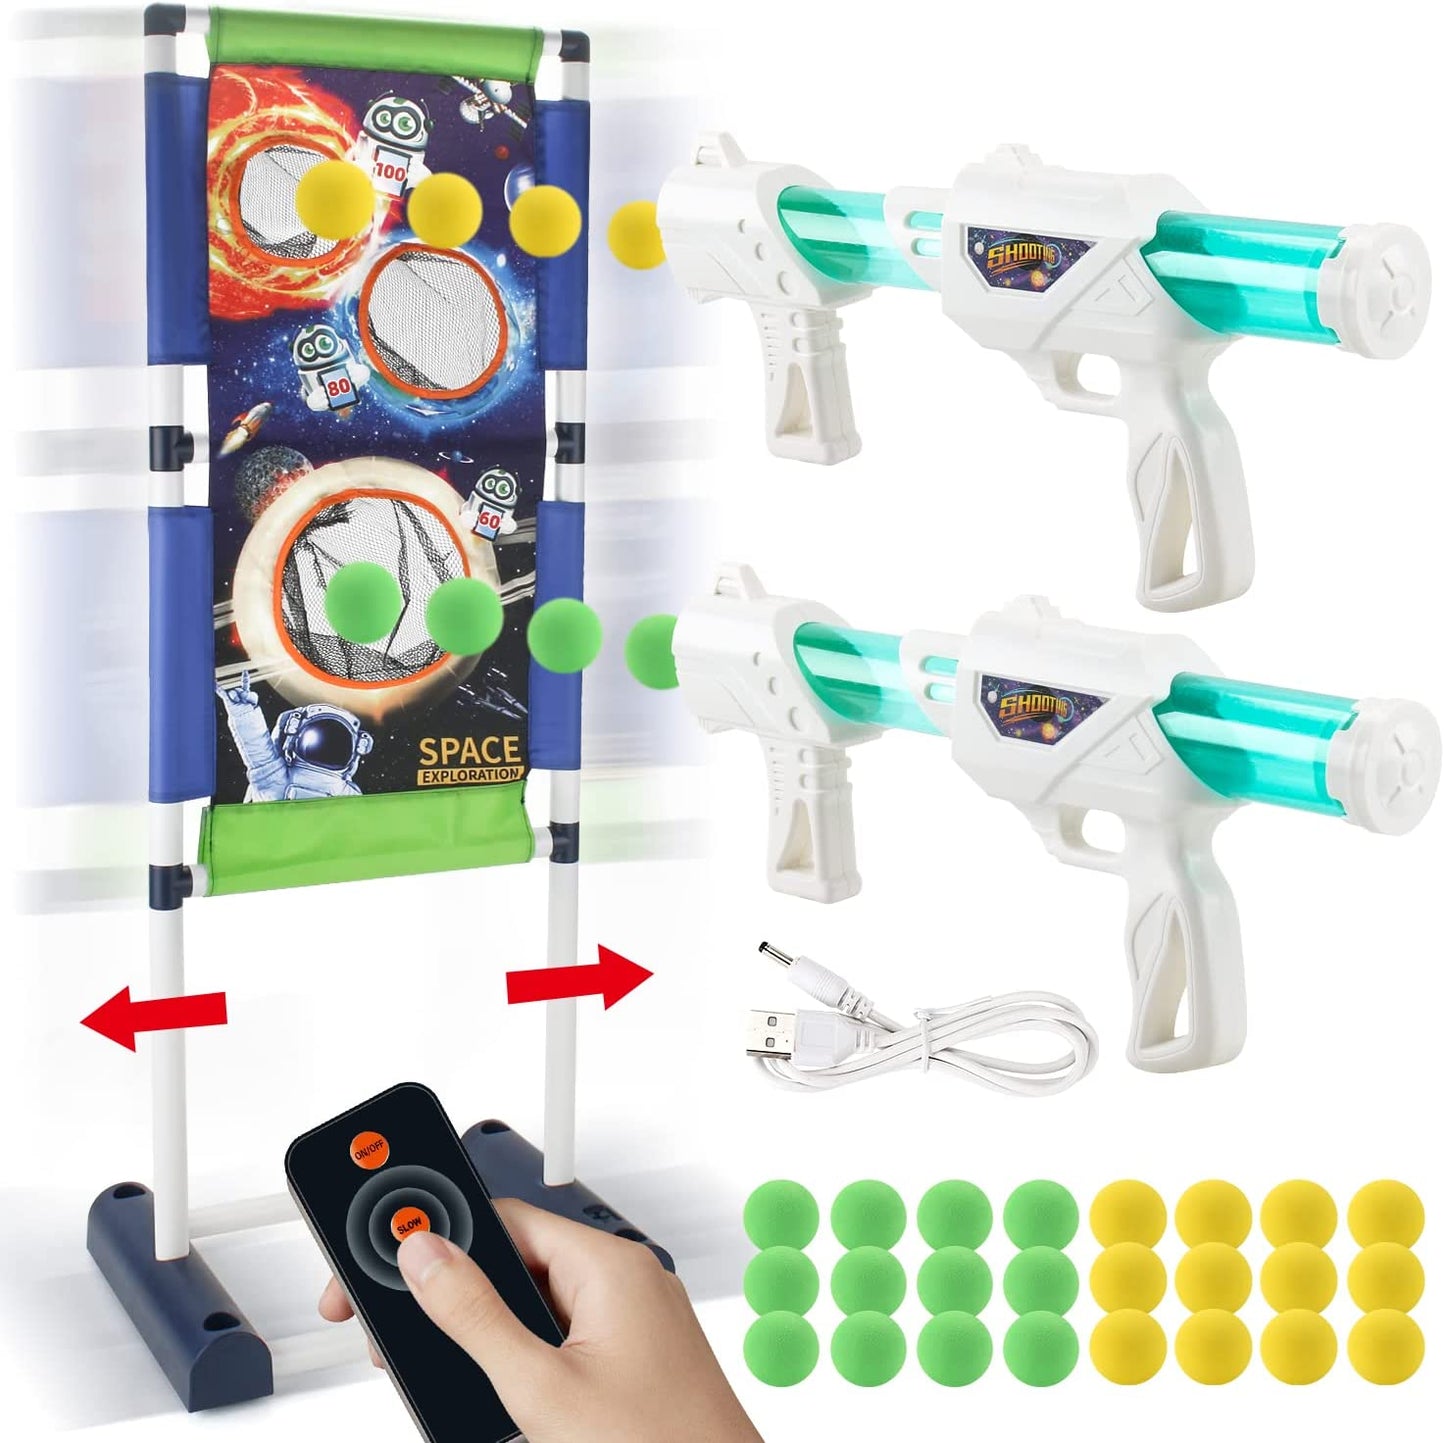 Space Toy Foam Blasters & Guns Shooting Game with Moving Target